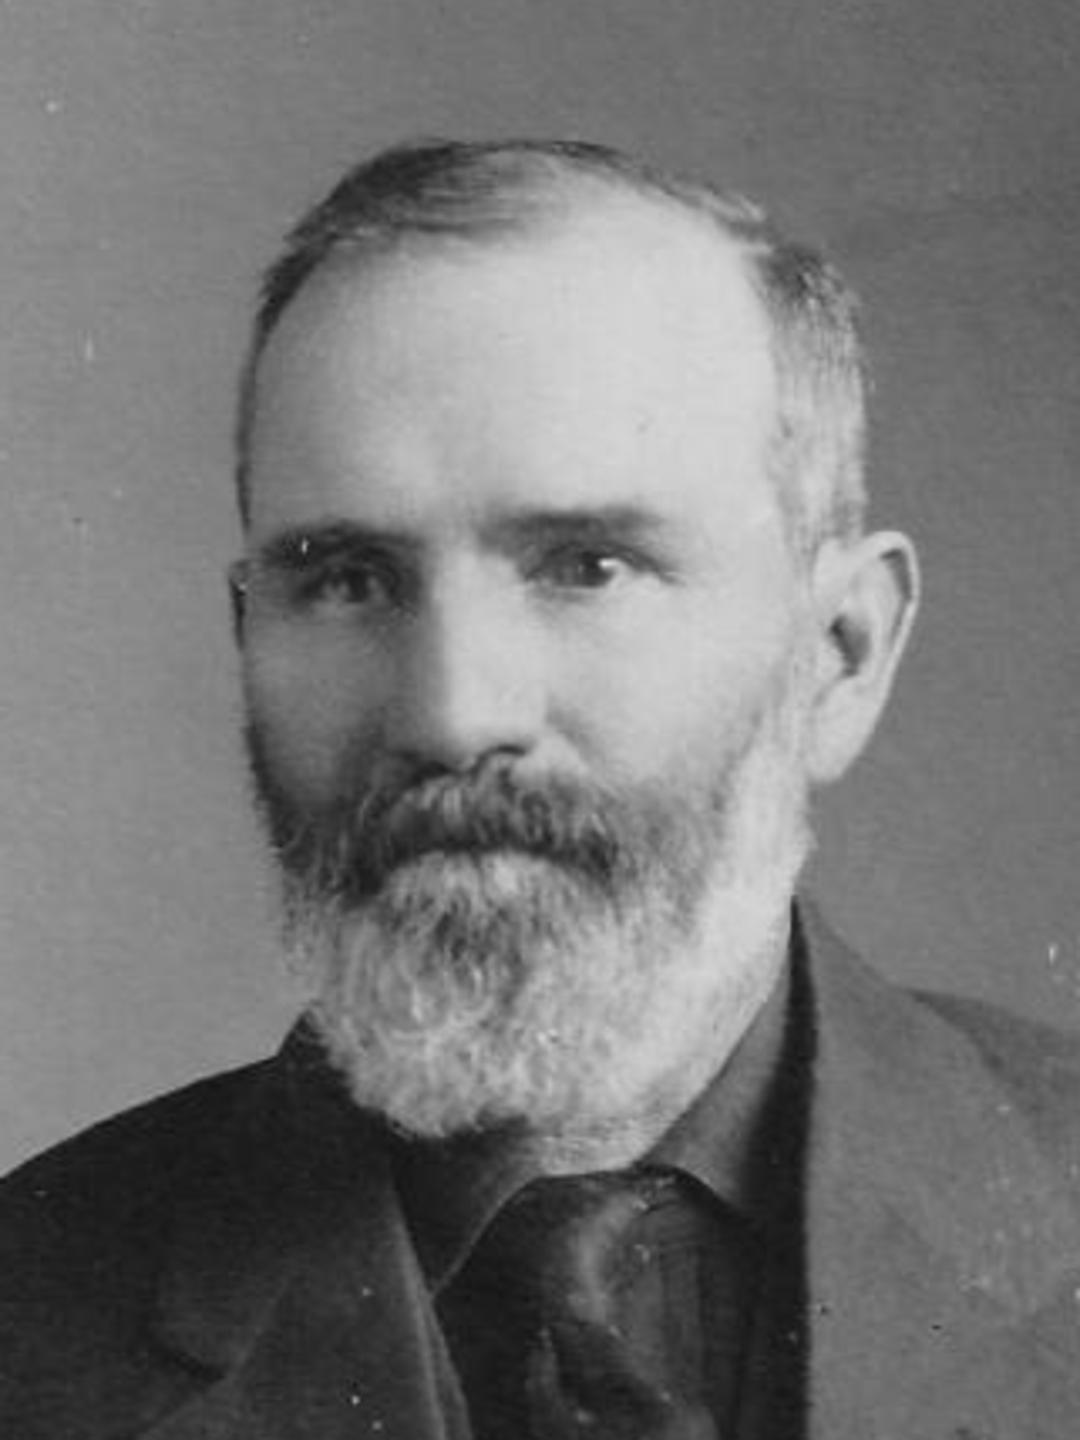 William Hoover Gibbons (1851 - 1925) Profile